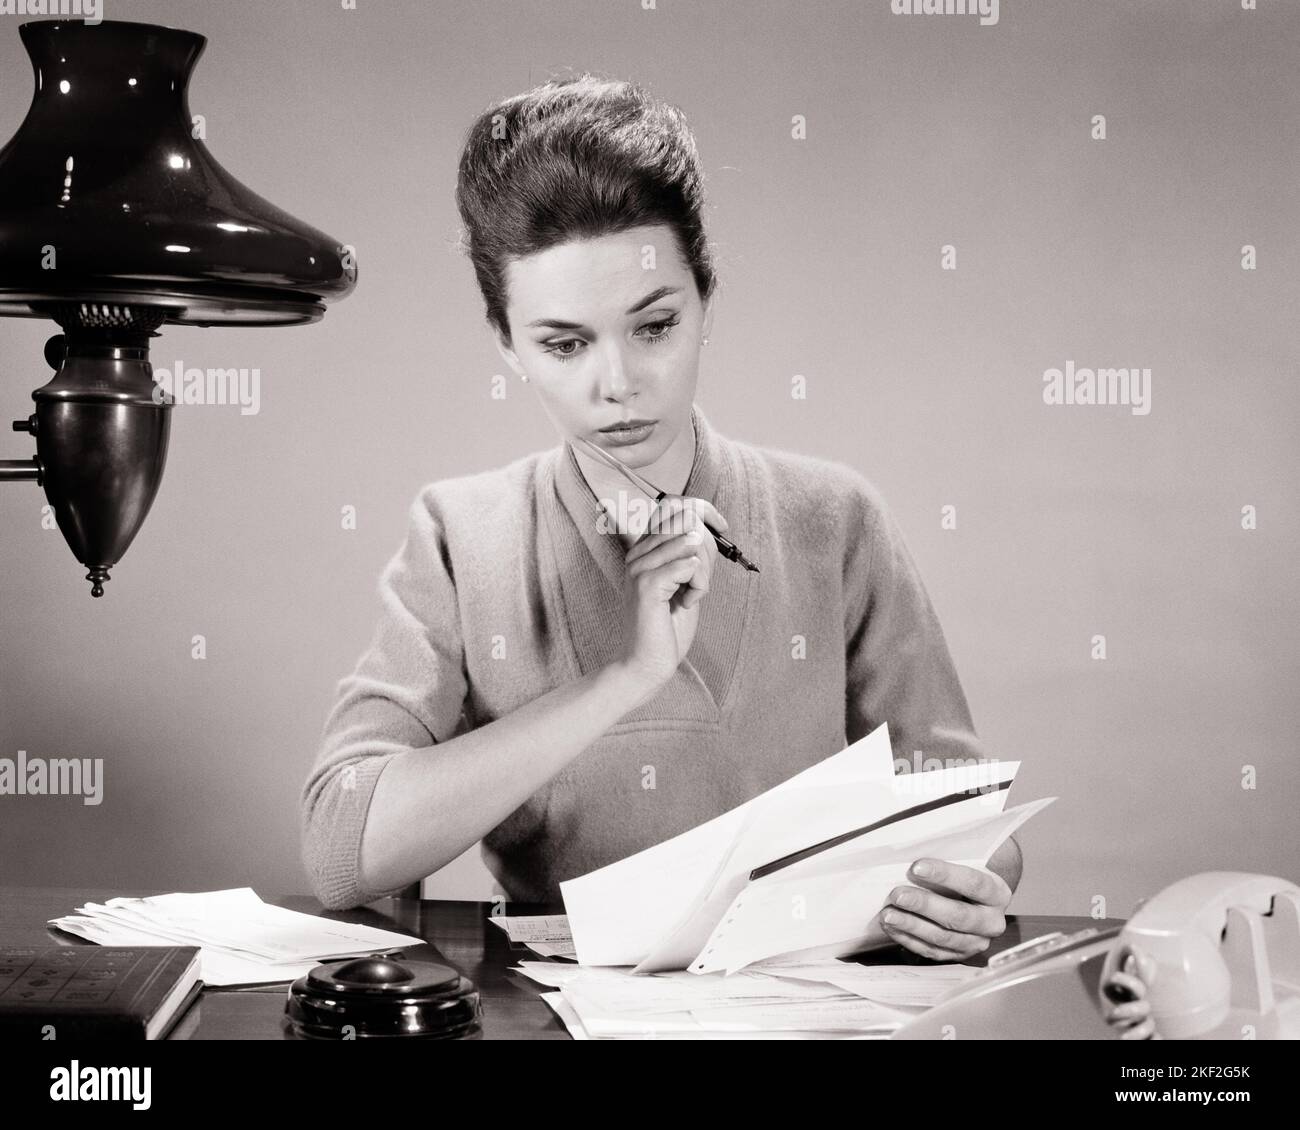 1950s 1960s BRUNETTE WOMAN AT HOME DESK PEN IN HAND PONDERING HANDFUL OF INVOICES BILLS DOCUMENTS PAPER WORK  - s12953 HAR001 HARS HOME LIFE COPY SPACE HALF-LENGTH LADIES PERSONS CARING B&W BRUNETTE GOALS SKILL OCCUPATION DOCUMENTS SKILLS DISCOVERY KNOWLEDGE OFFICE WORKER OPPORTUNITY OCCUPATIONS PONDERING CONNECTION GAL FRIDAY ADMINISTRATOR SECRETARIES PAPER WORK AMANUENSIS GROWTH HANDFUL SOLUTIONS TASK YOUNG ADULT WOMAN BLACK AND WHITE CAUCASIAN ETHNICITY CLERICAL HAR001 INVOICES OLD FASHIONED Stock Photo